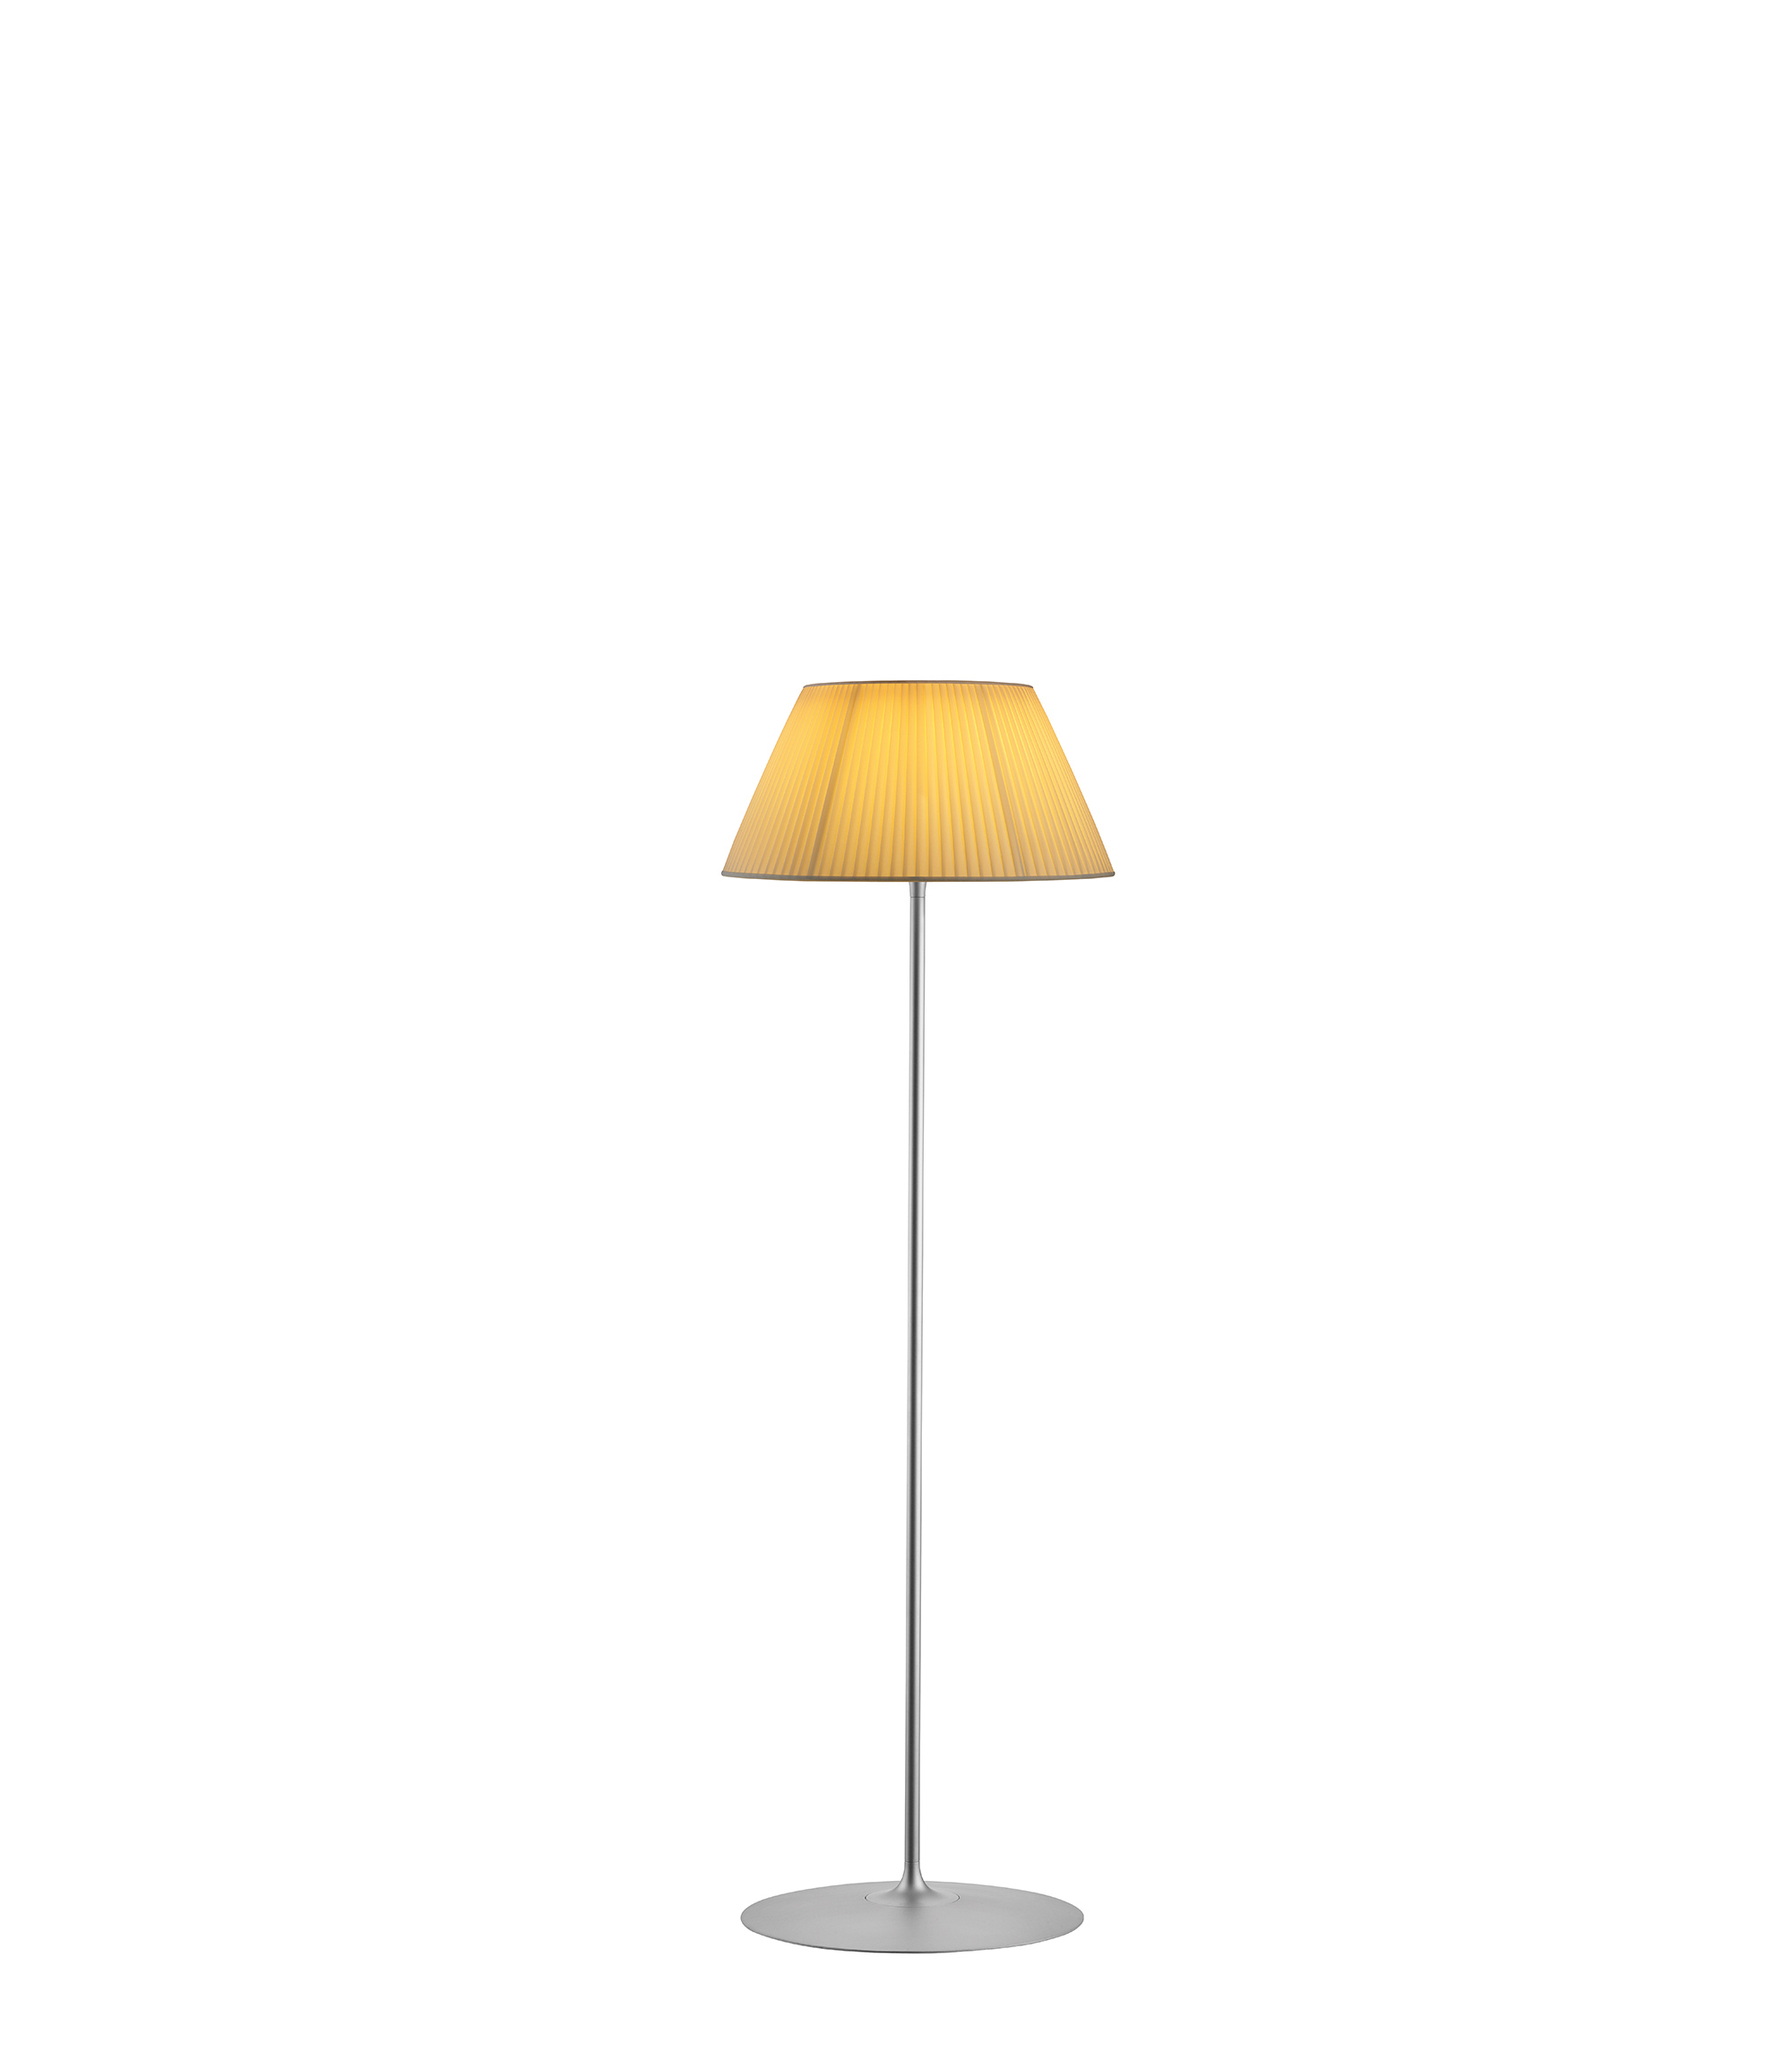 Romeo Soft Floor Lampe Boden Flos within size 2000 X 2300